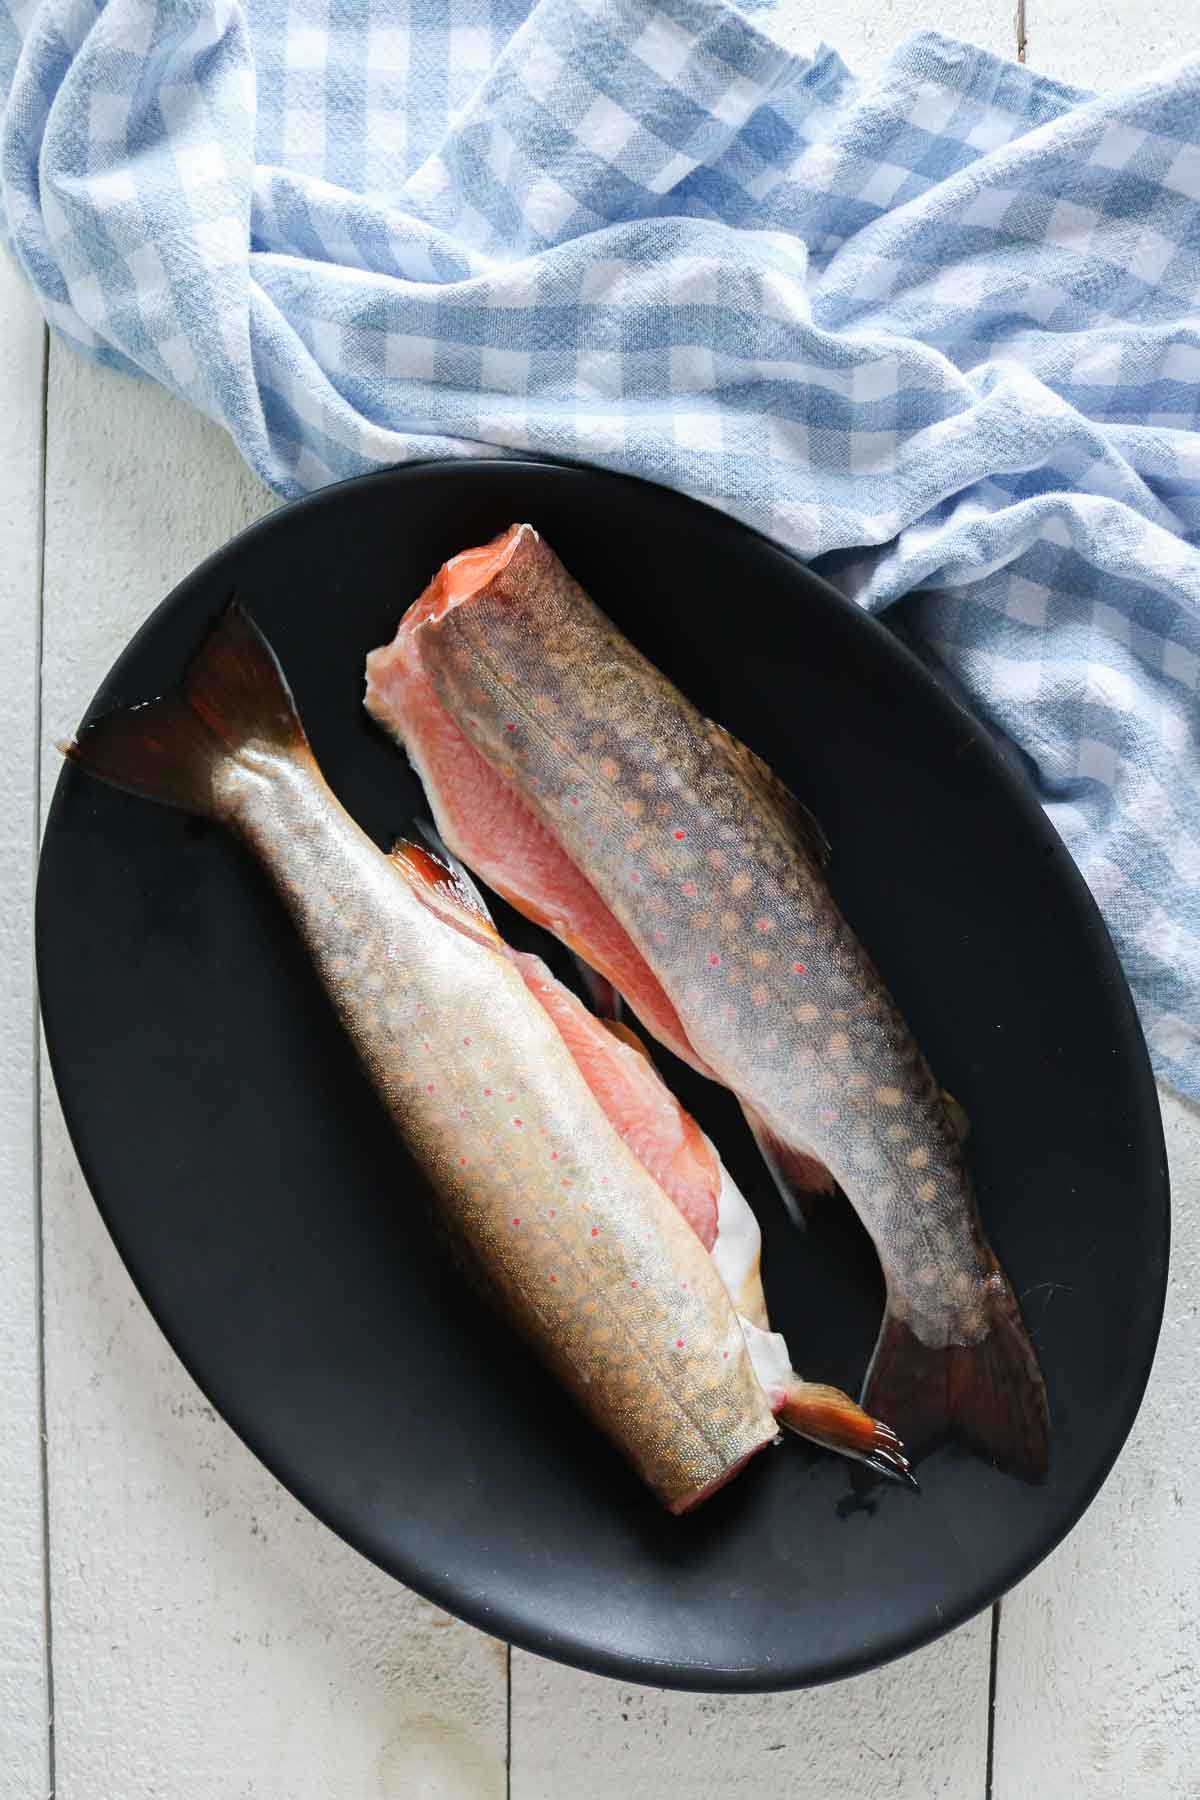 Two uncooked trout on a platter.